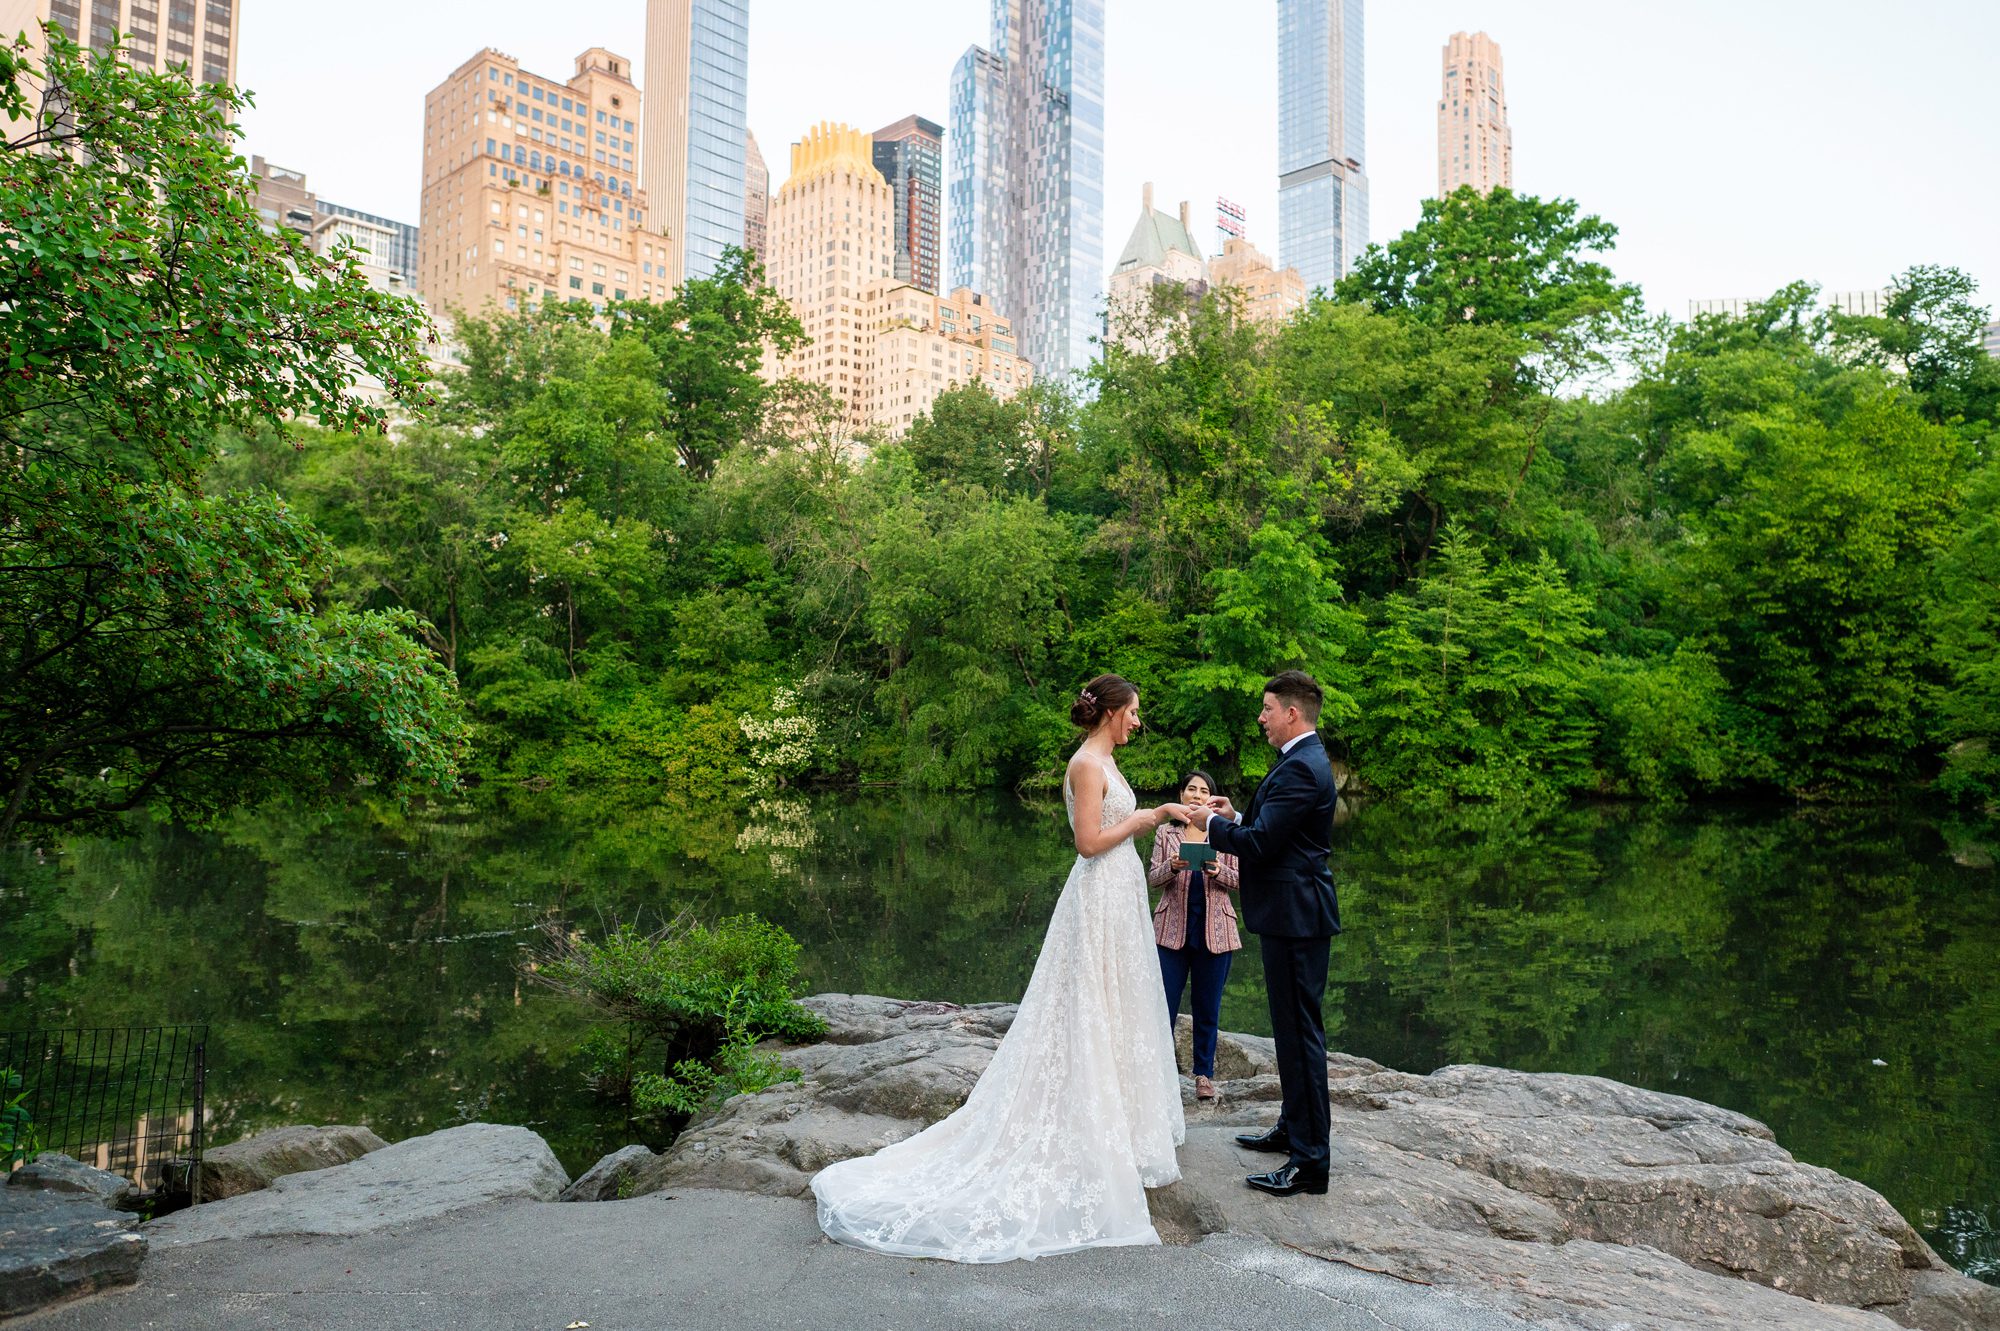 Couple getting married in Central Park at sunrise